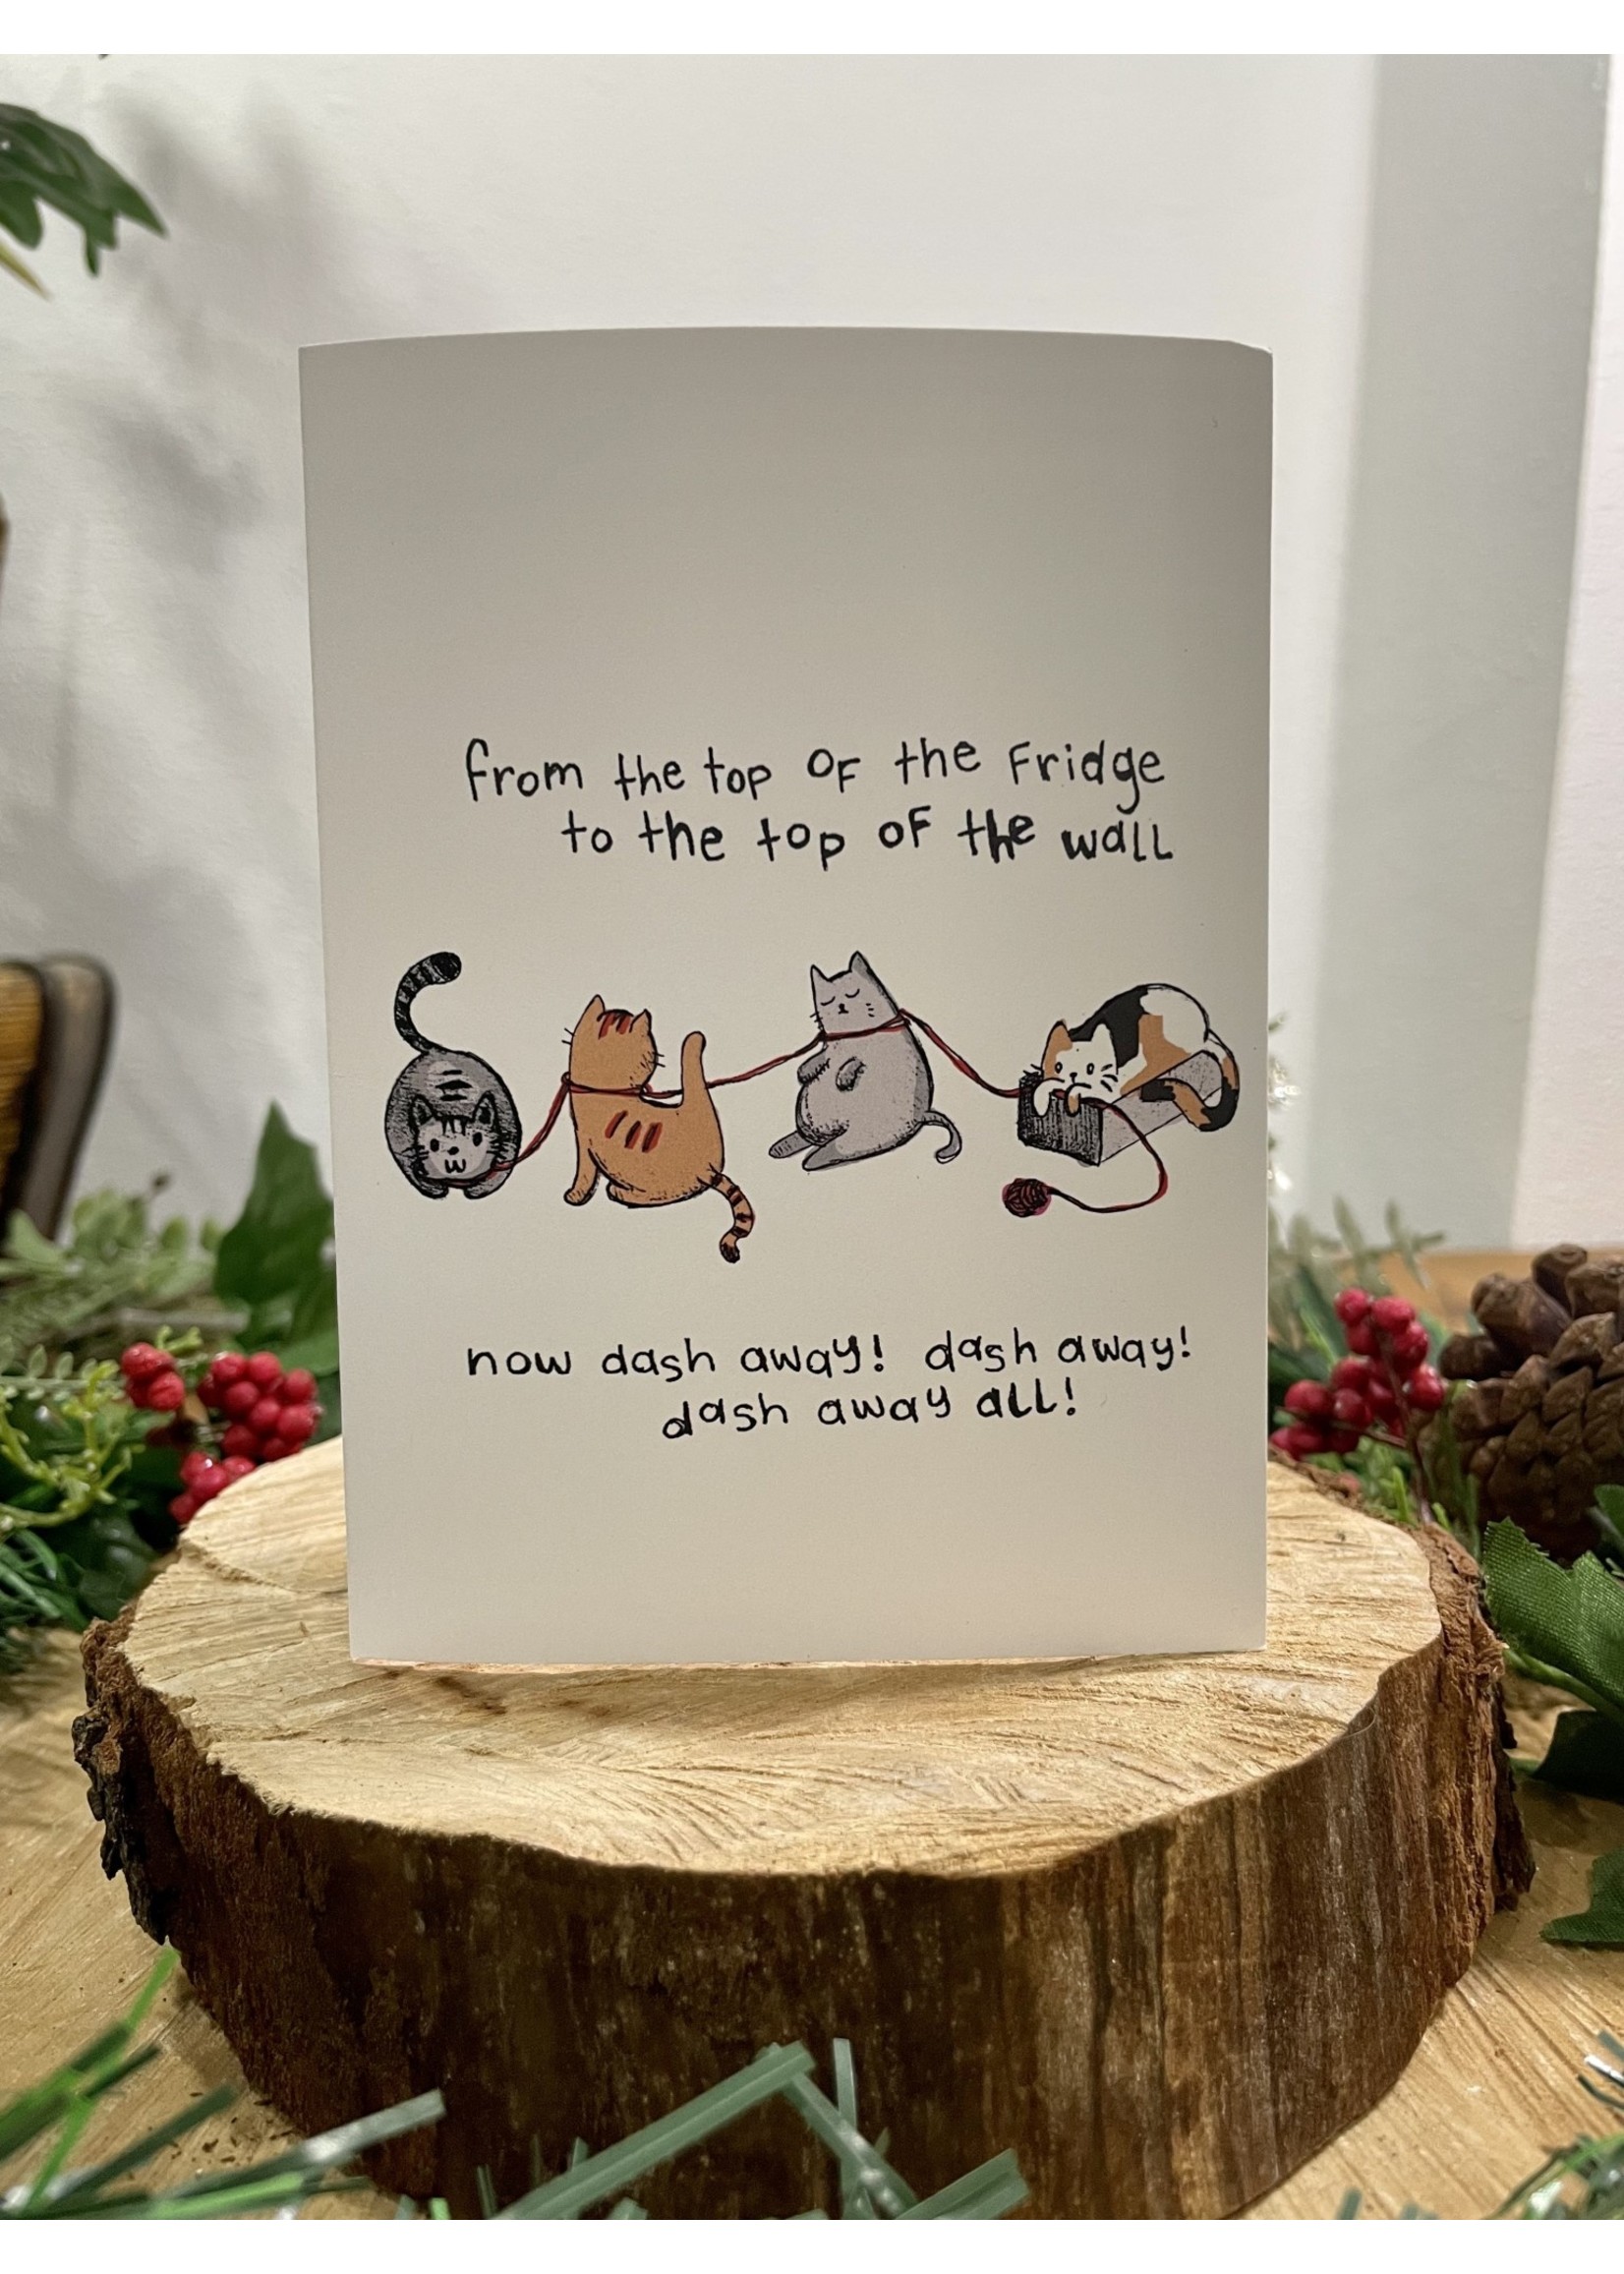 Tangled Up In Hue Greeting Card - Dash Away All - Cats